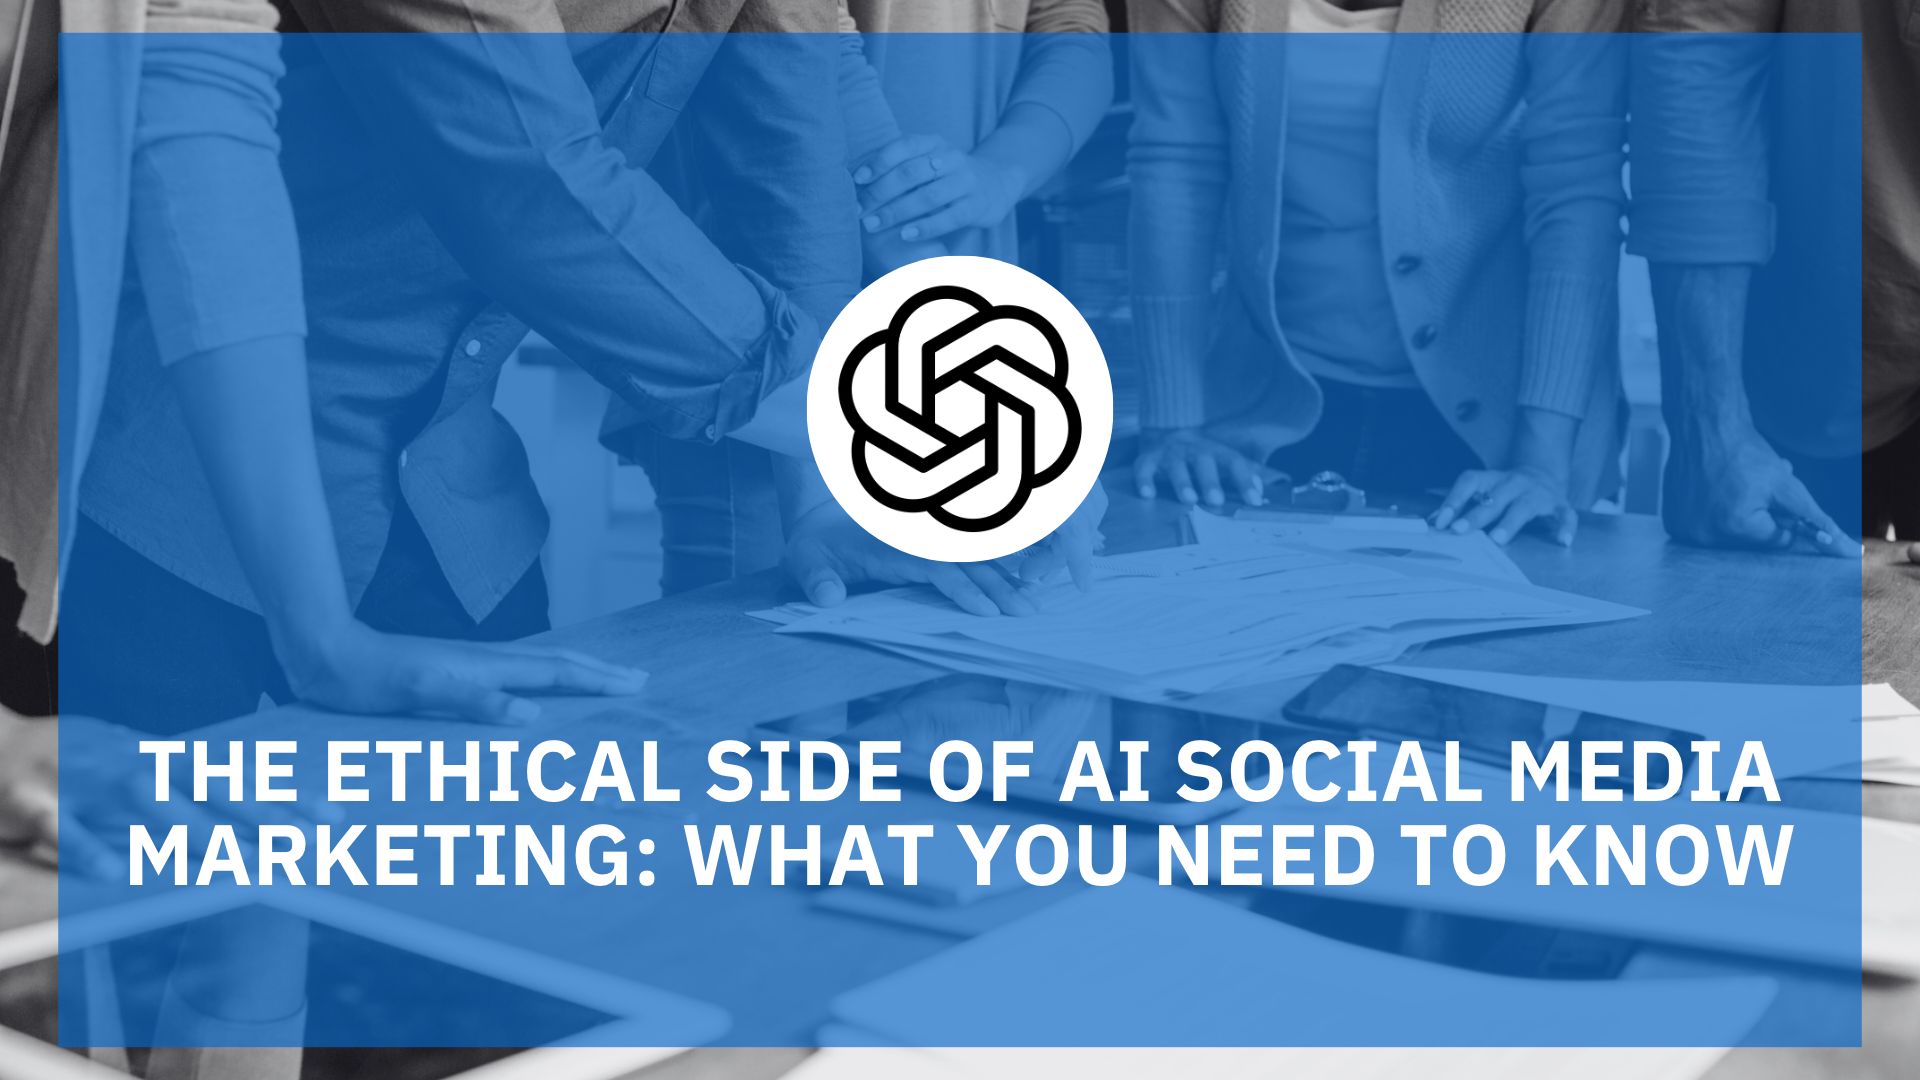 https://marketingelementsblog.com/2023/05/the-ethical-side-of-ai-social-media-marketing-what-you-need-to-know/